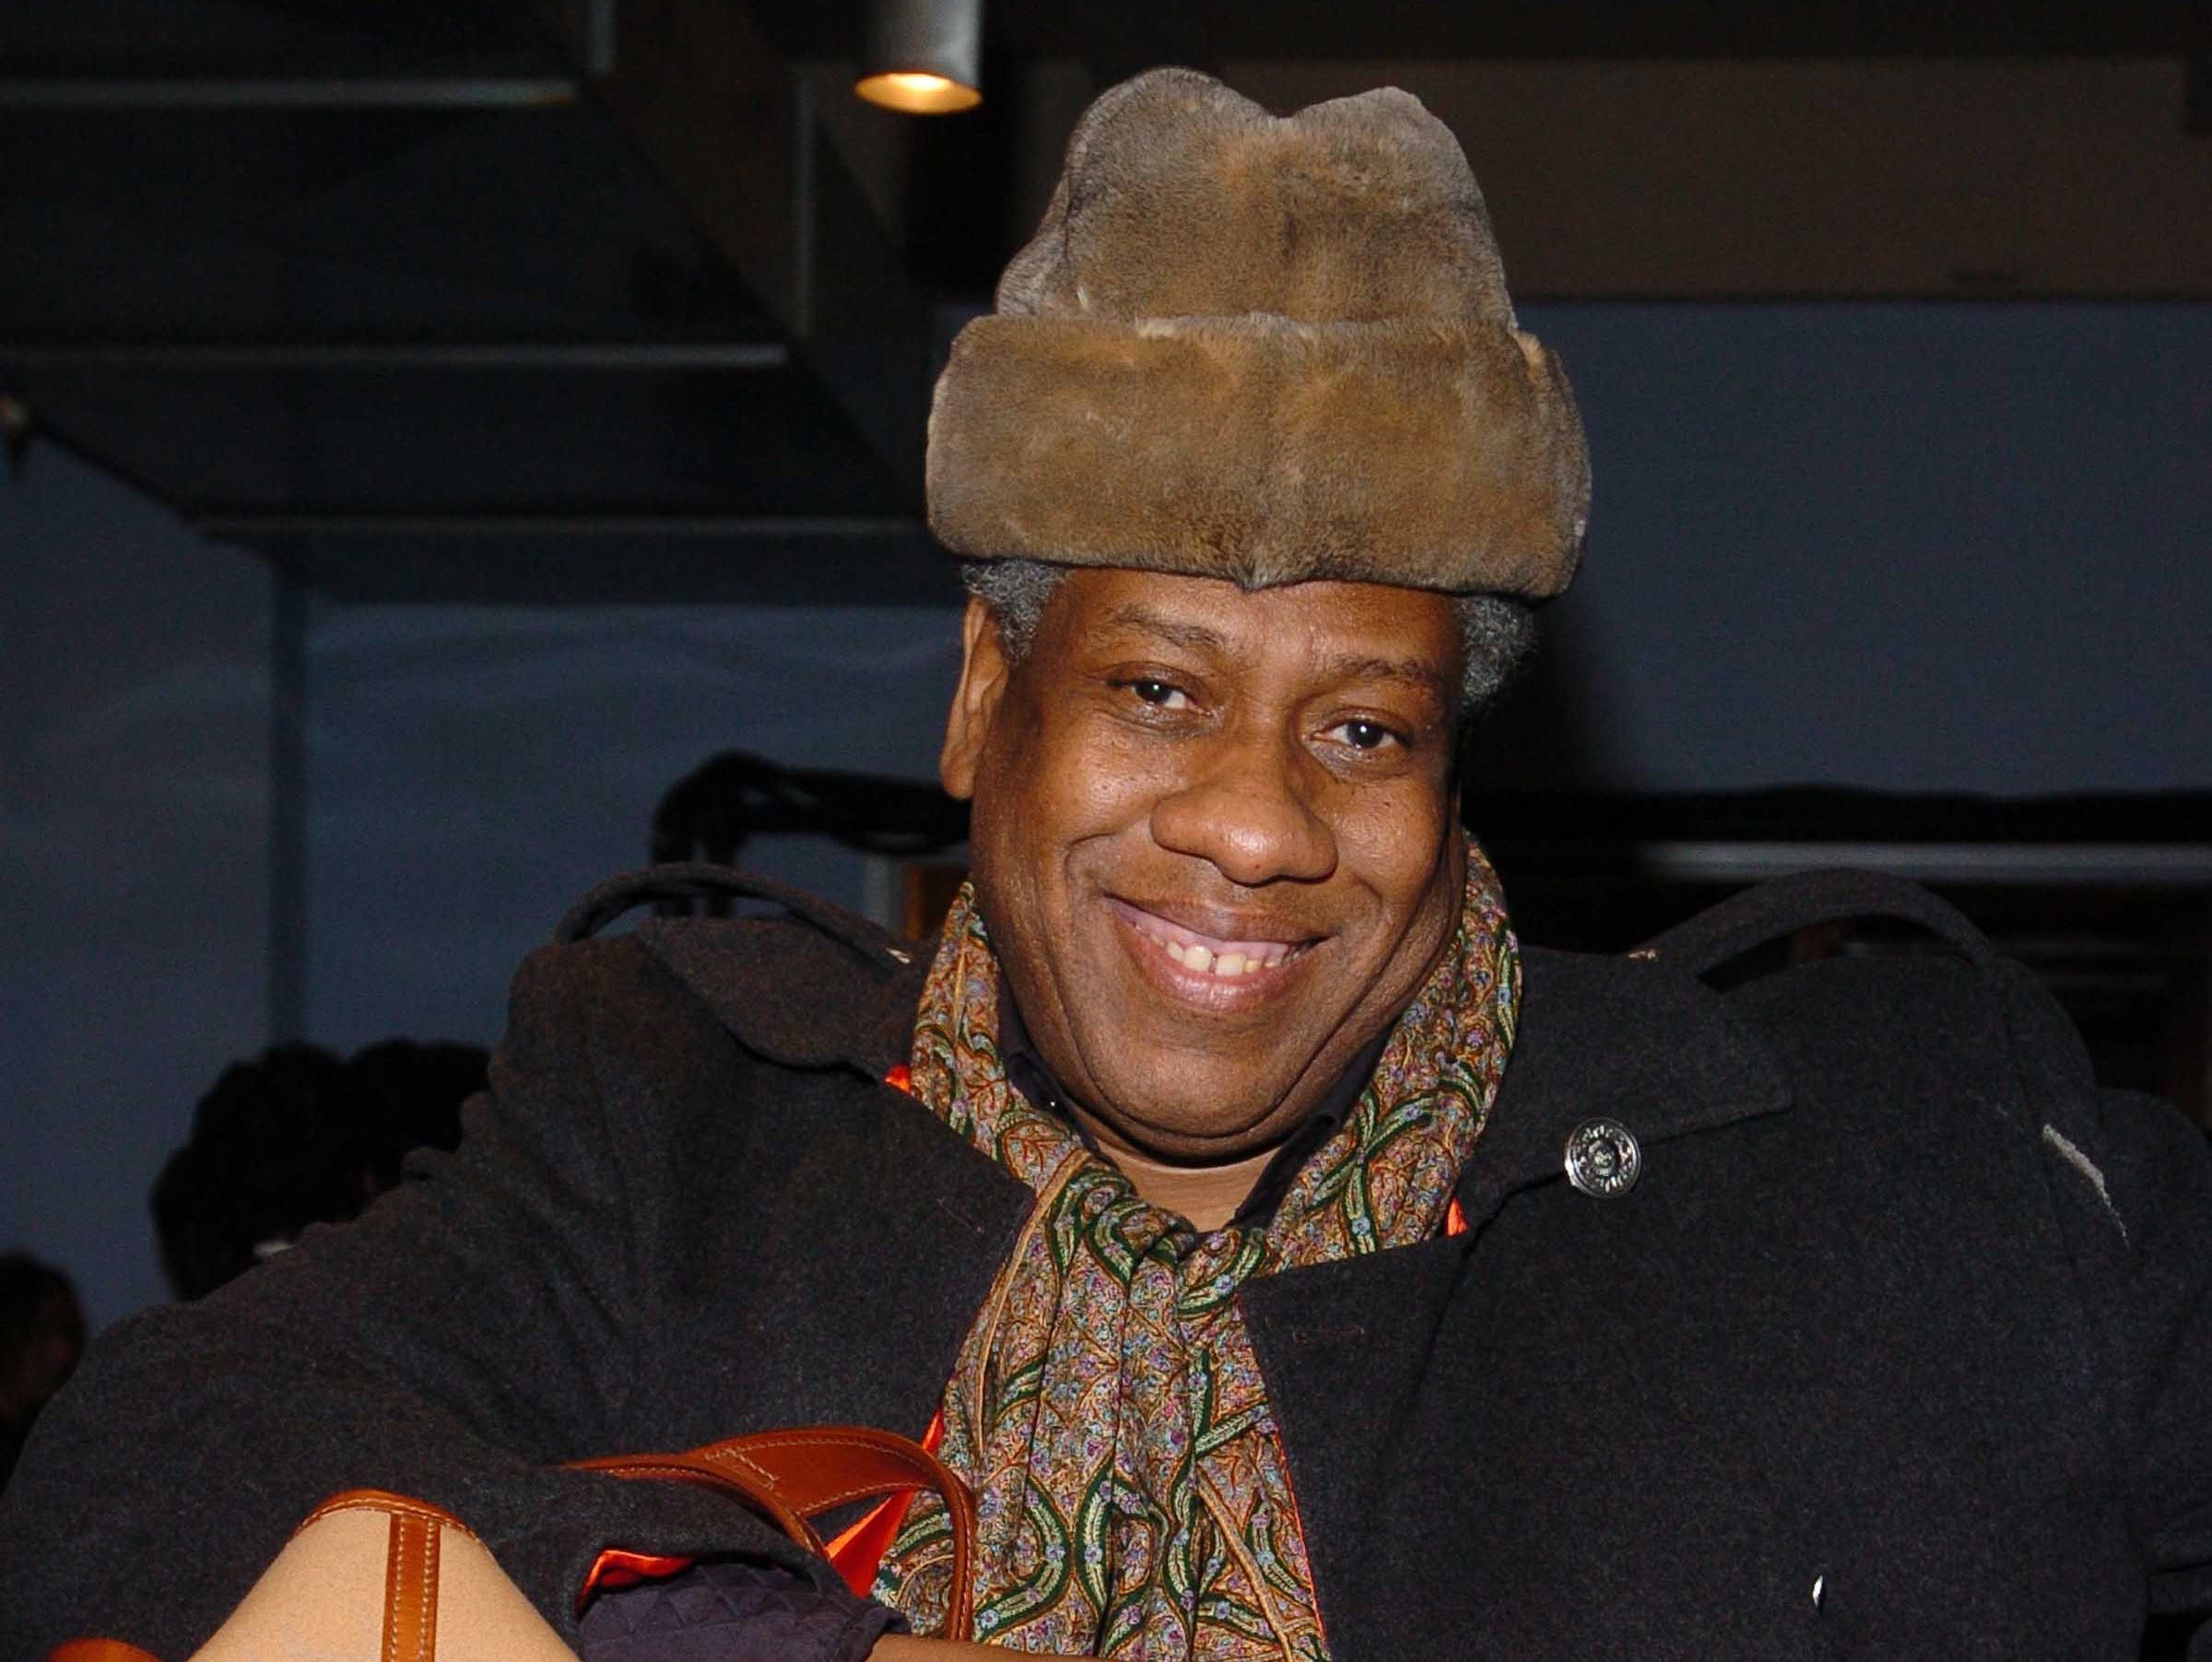 André Leon Talley attends Calvin Klein Fall 2005 Fashion Show.